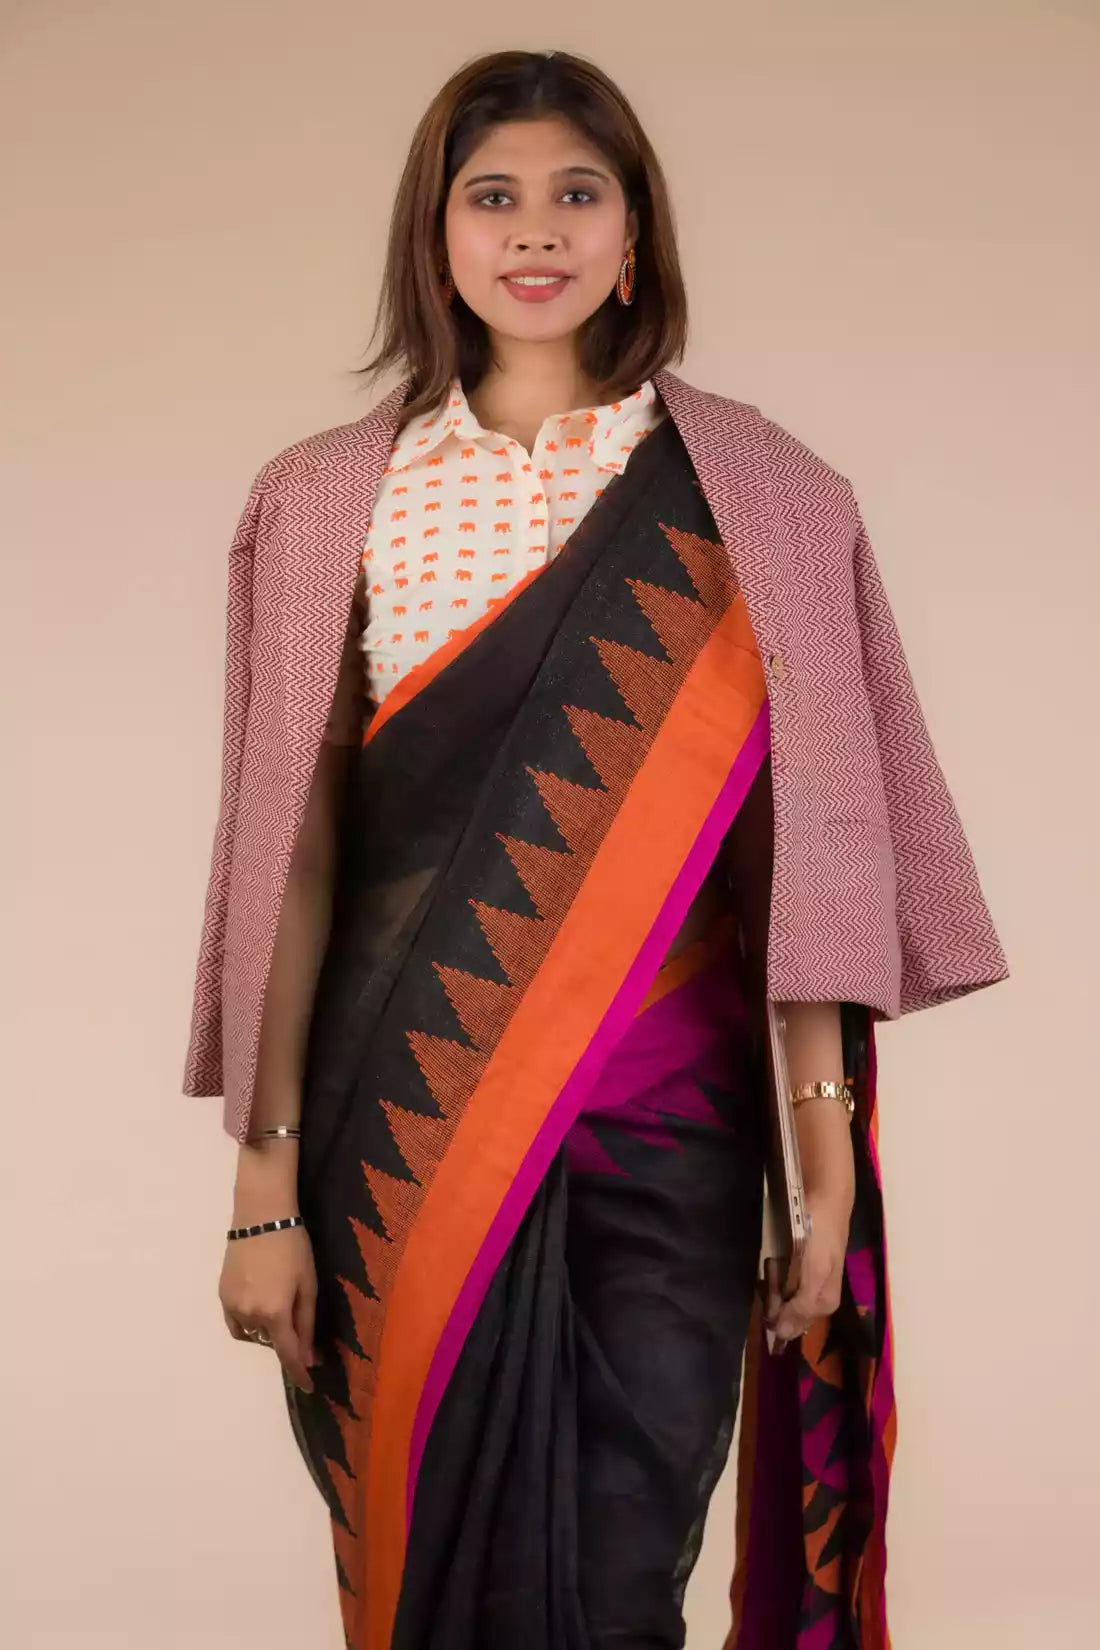 This the portrait of lady in Black with Orange and pink border Jamdani hand weaving Saree with formal blazer for women